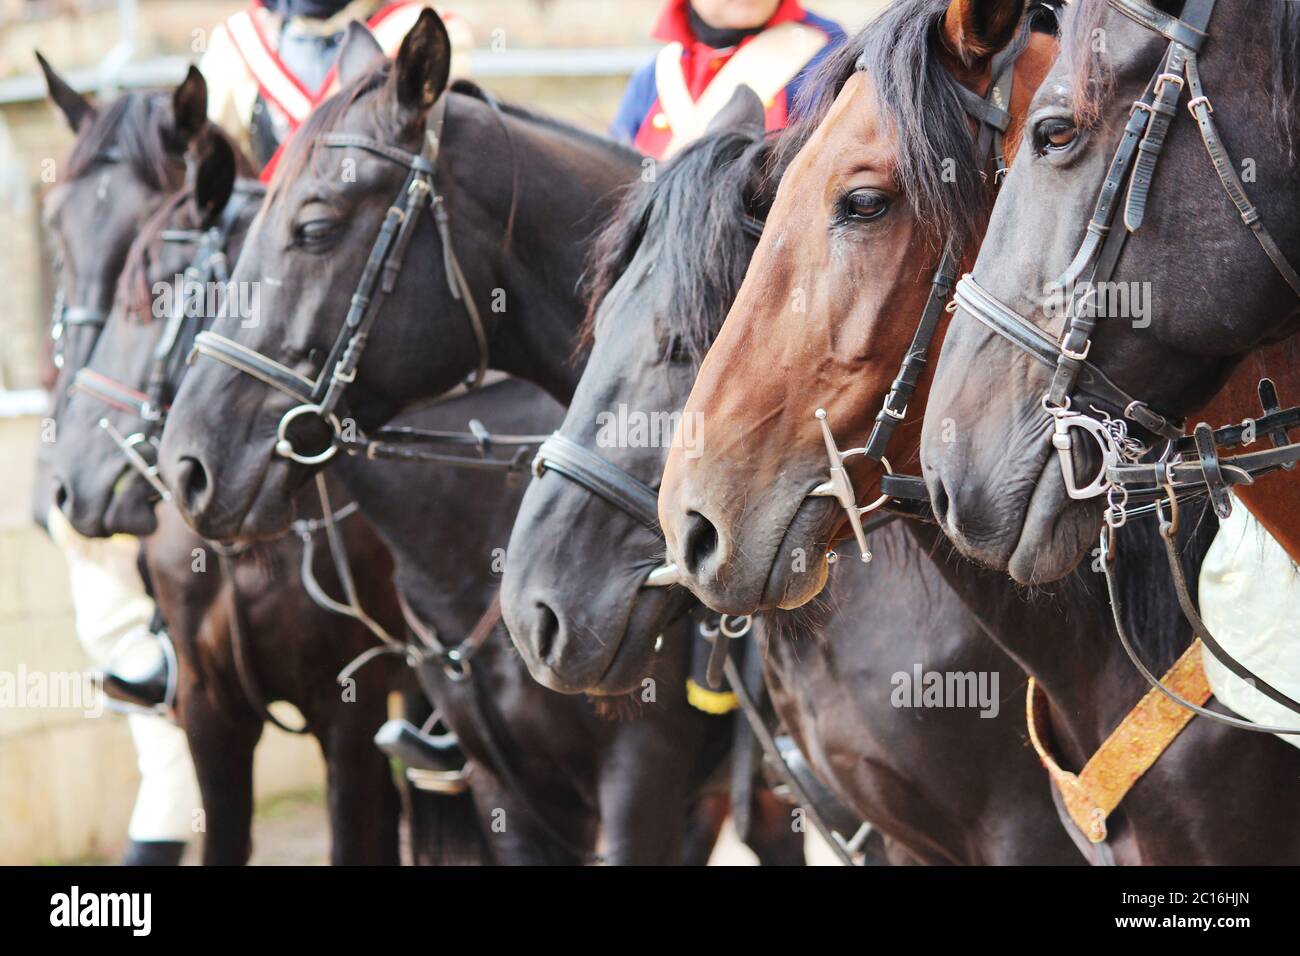 Several horse Equus caballus on a performance at City Day Gatchina Leningrad Region, Russia Stock Photo